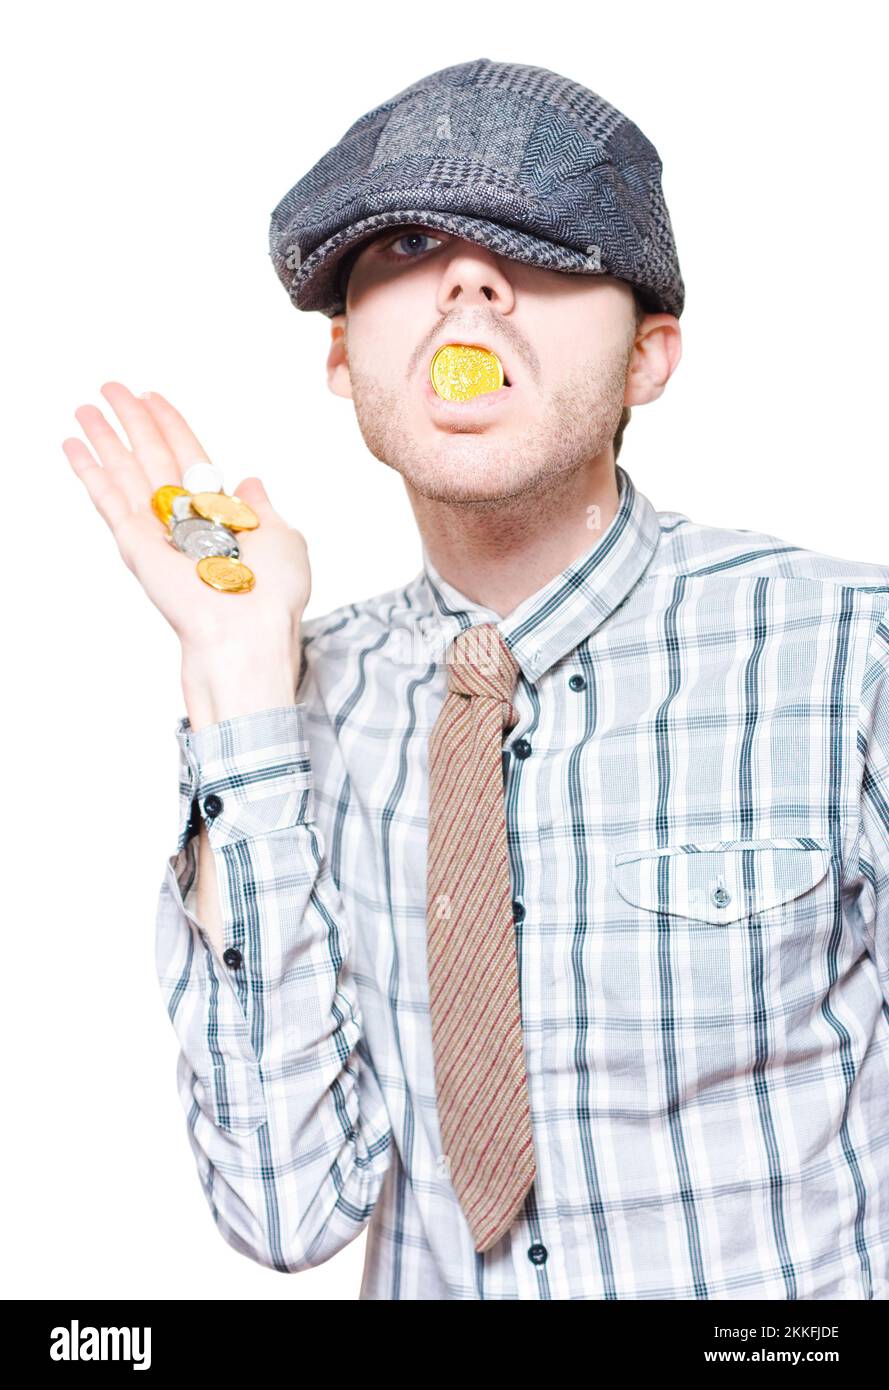 Unethical Business Person Eating Gold Coins When Hiding Financial Gains From The IRS Tax Department In A Money Laundering Concept On White Stock Photo